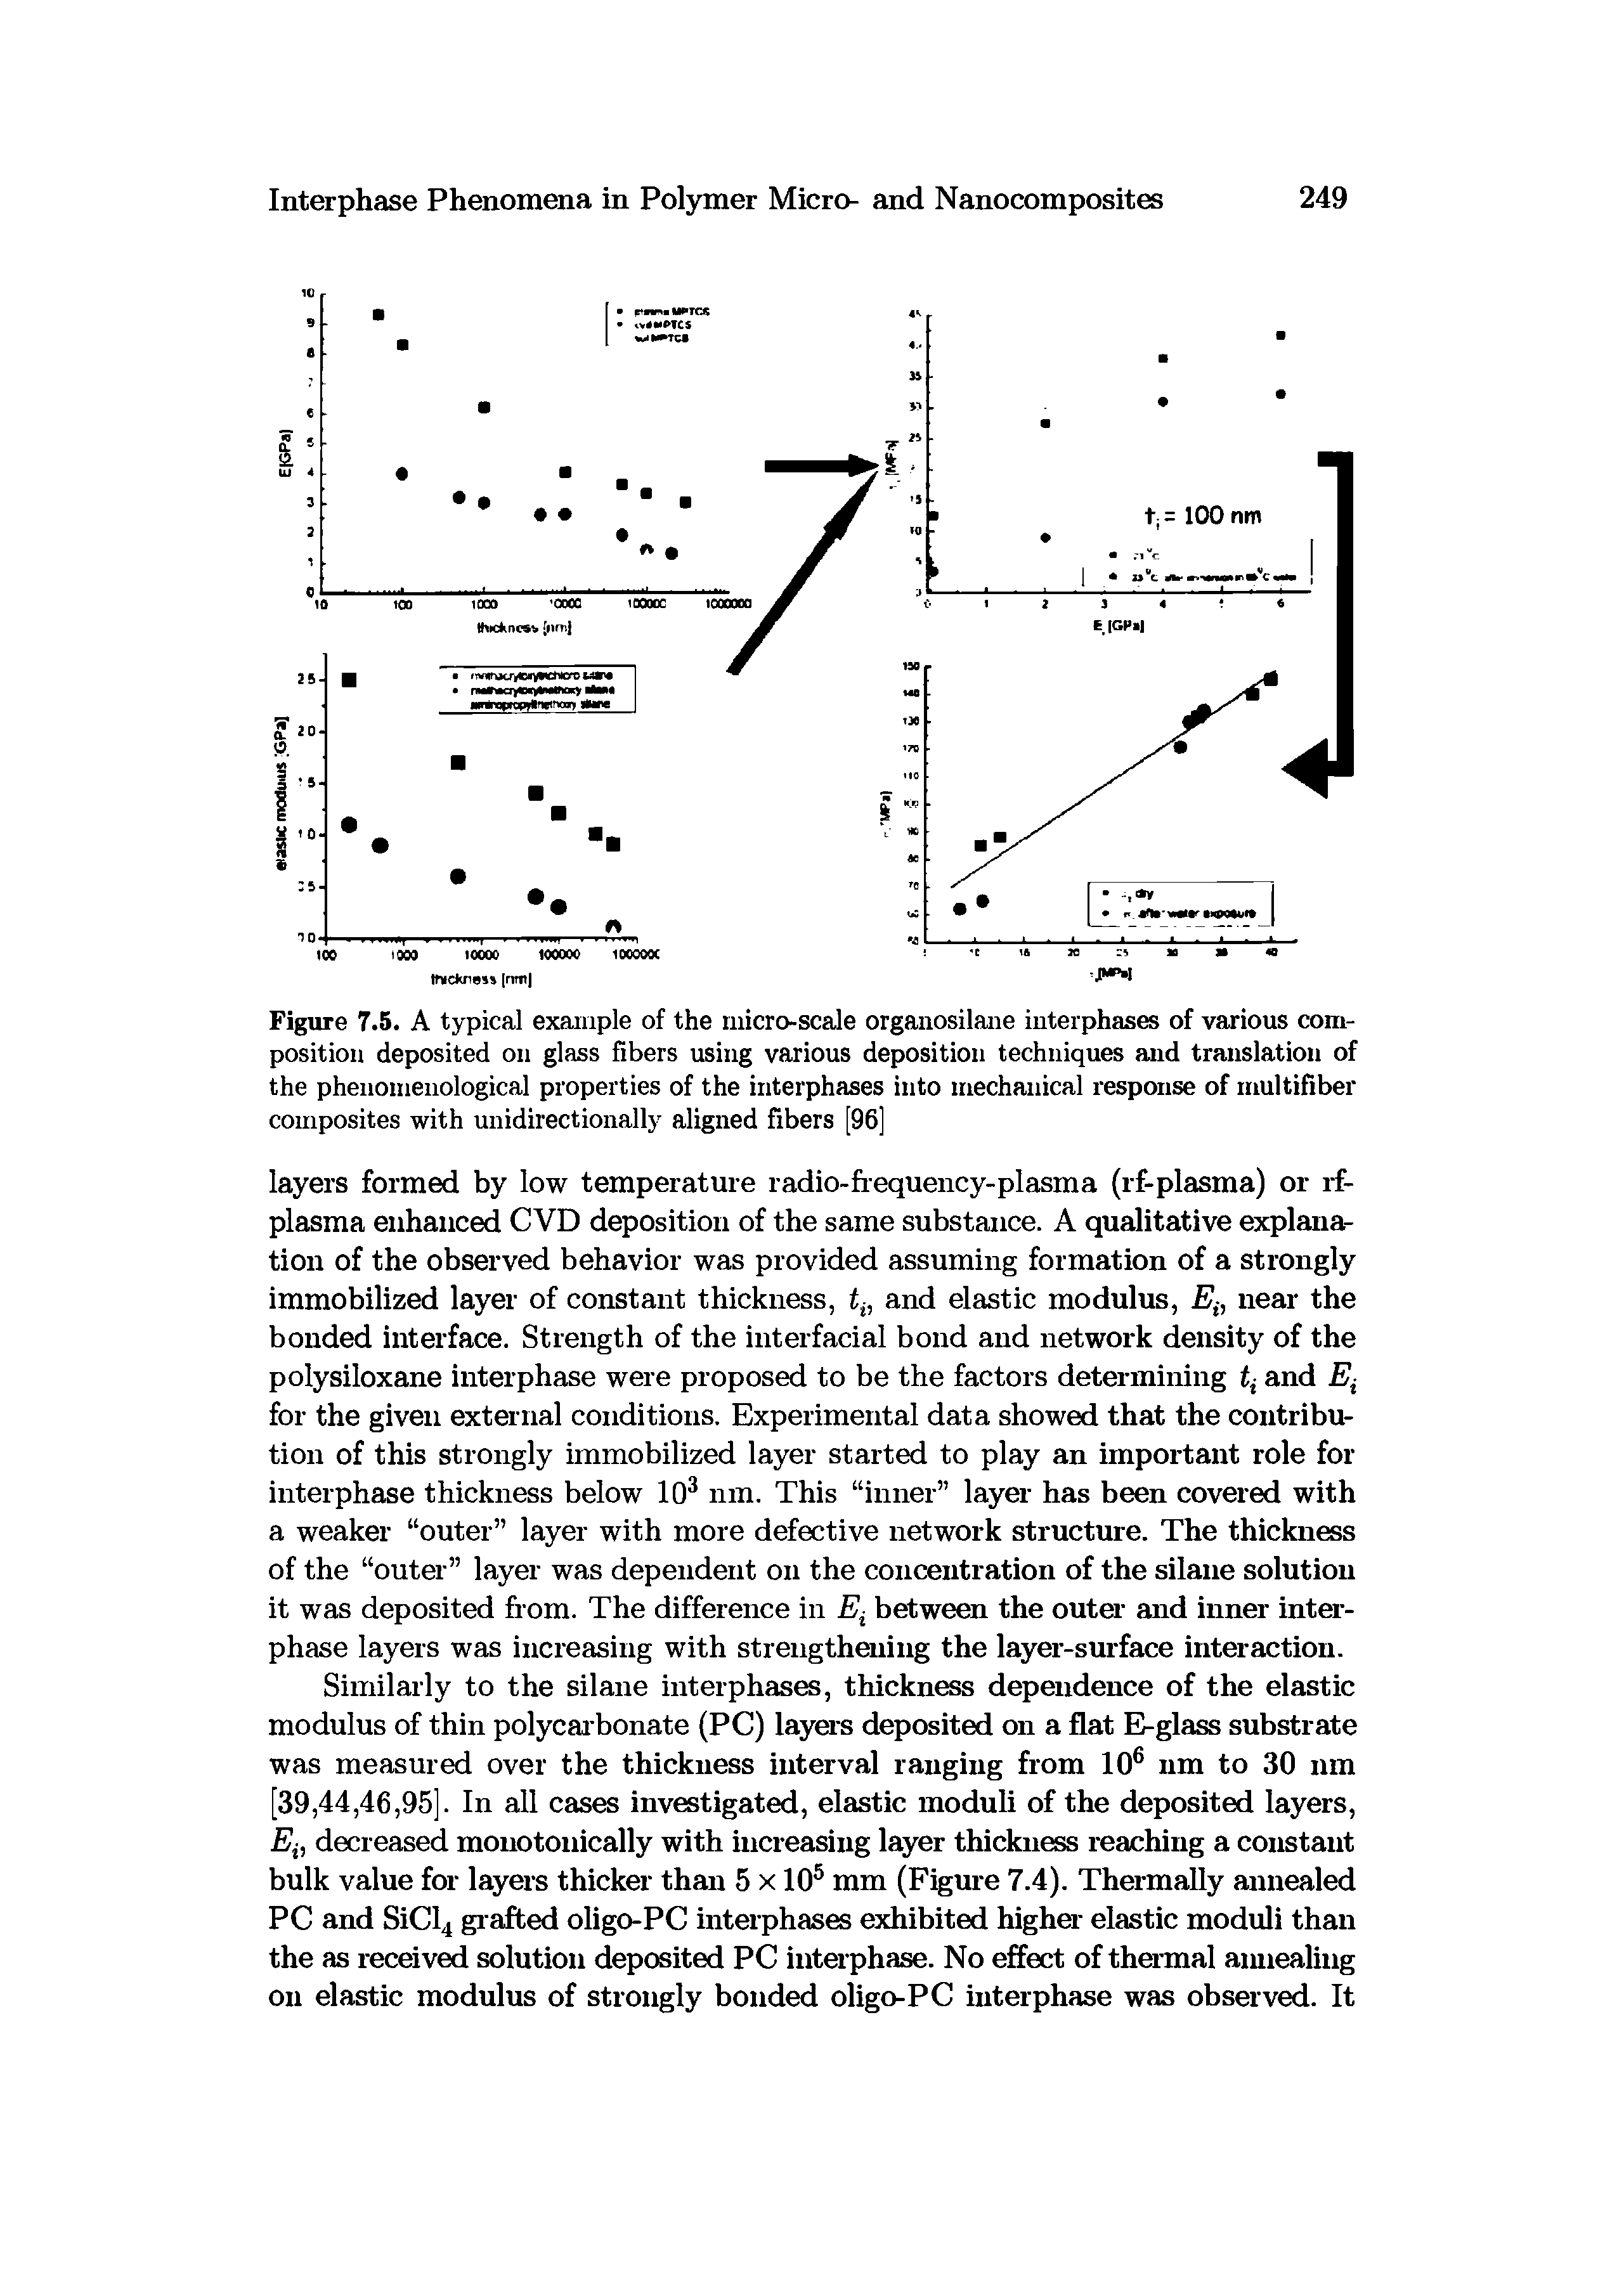 Figure 7.5. A typical example of the micro-scale organosilane iuterphases of various composition deposited on glass fibers using various deposition techniques and translation of the phenomenological properties of the interphases into mechanical response of multifiber composites with unidirectionally aligned fibers [96]...